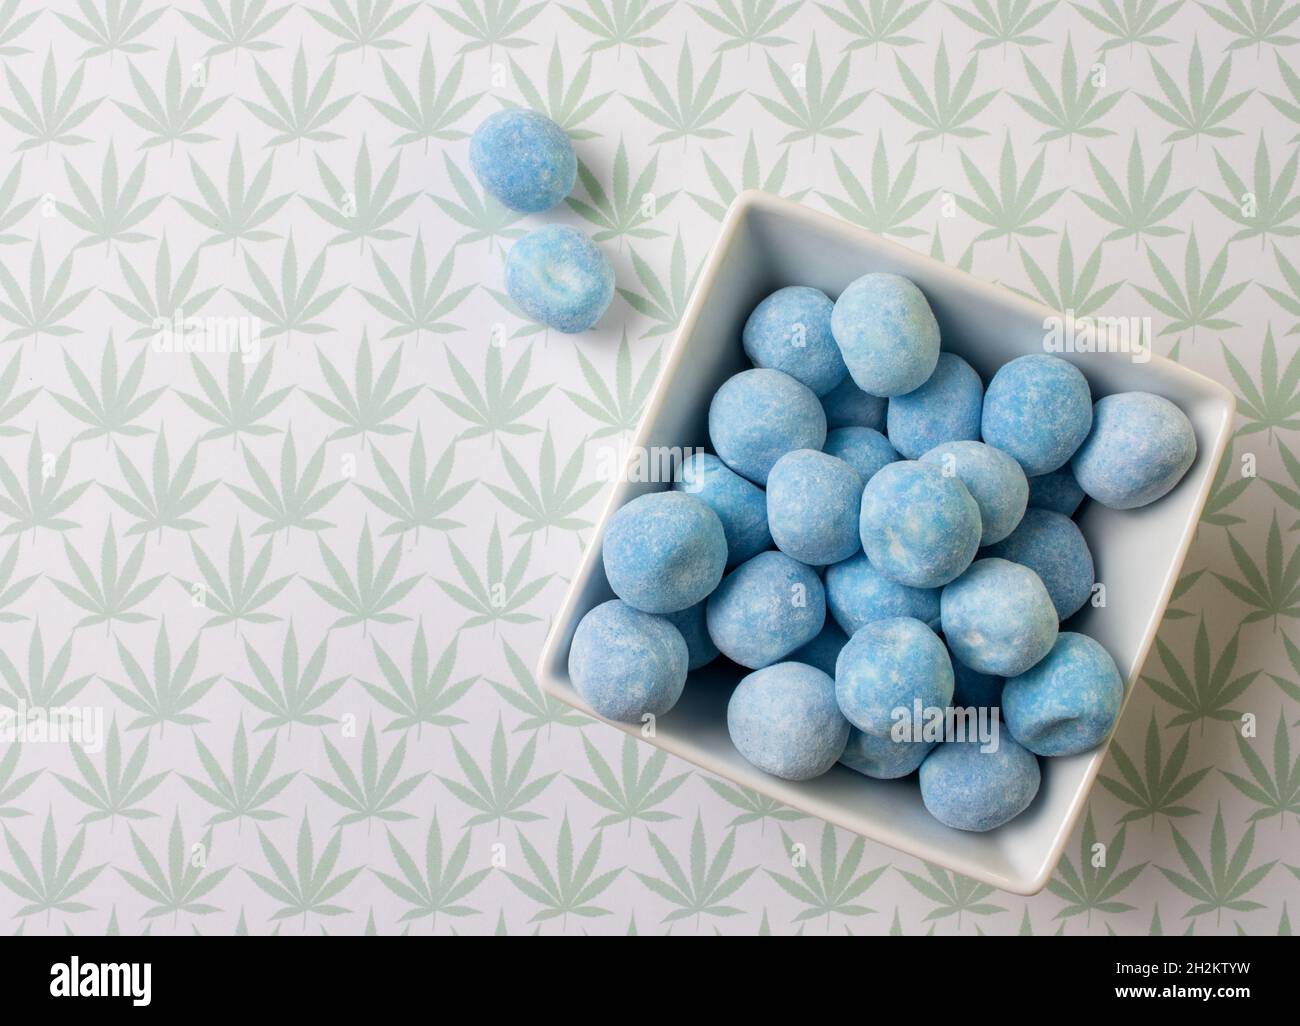 Cannabis infused blueberry chews, conceptual image Stock Photo